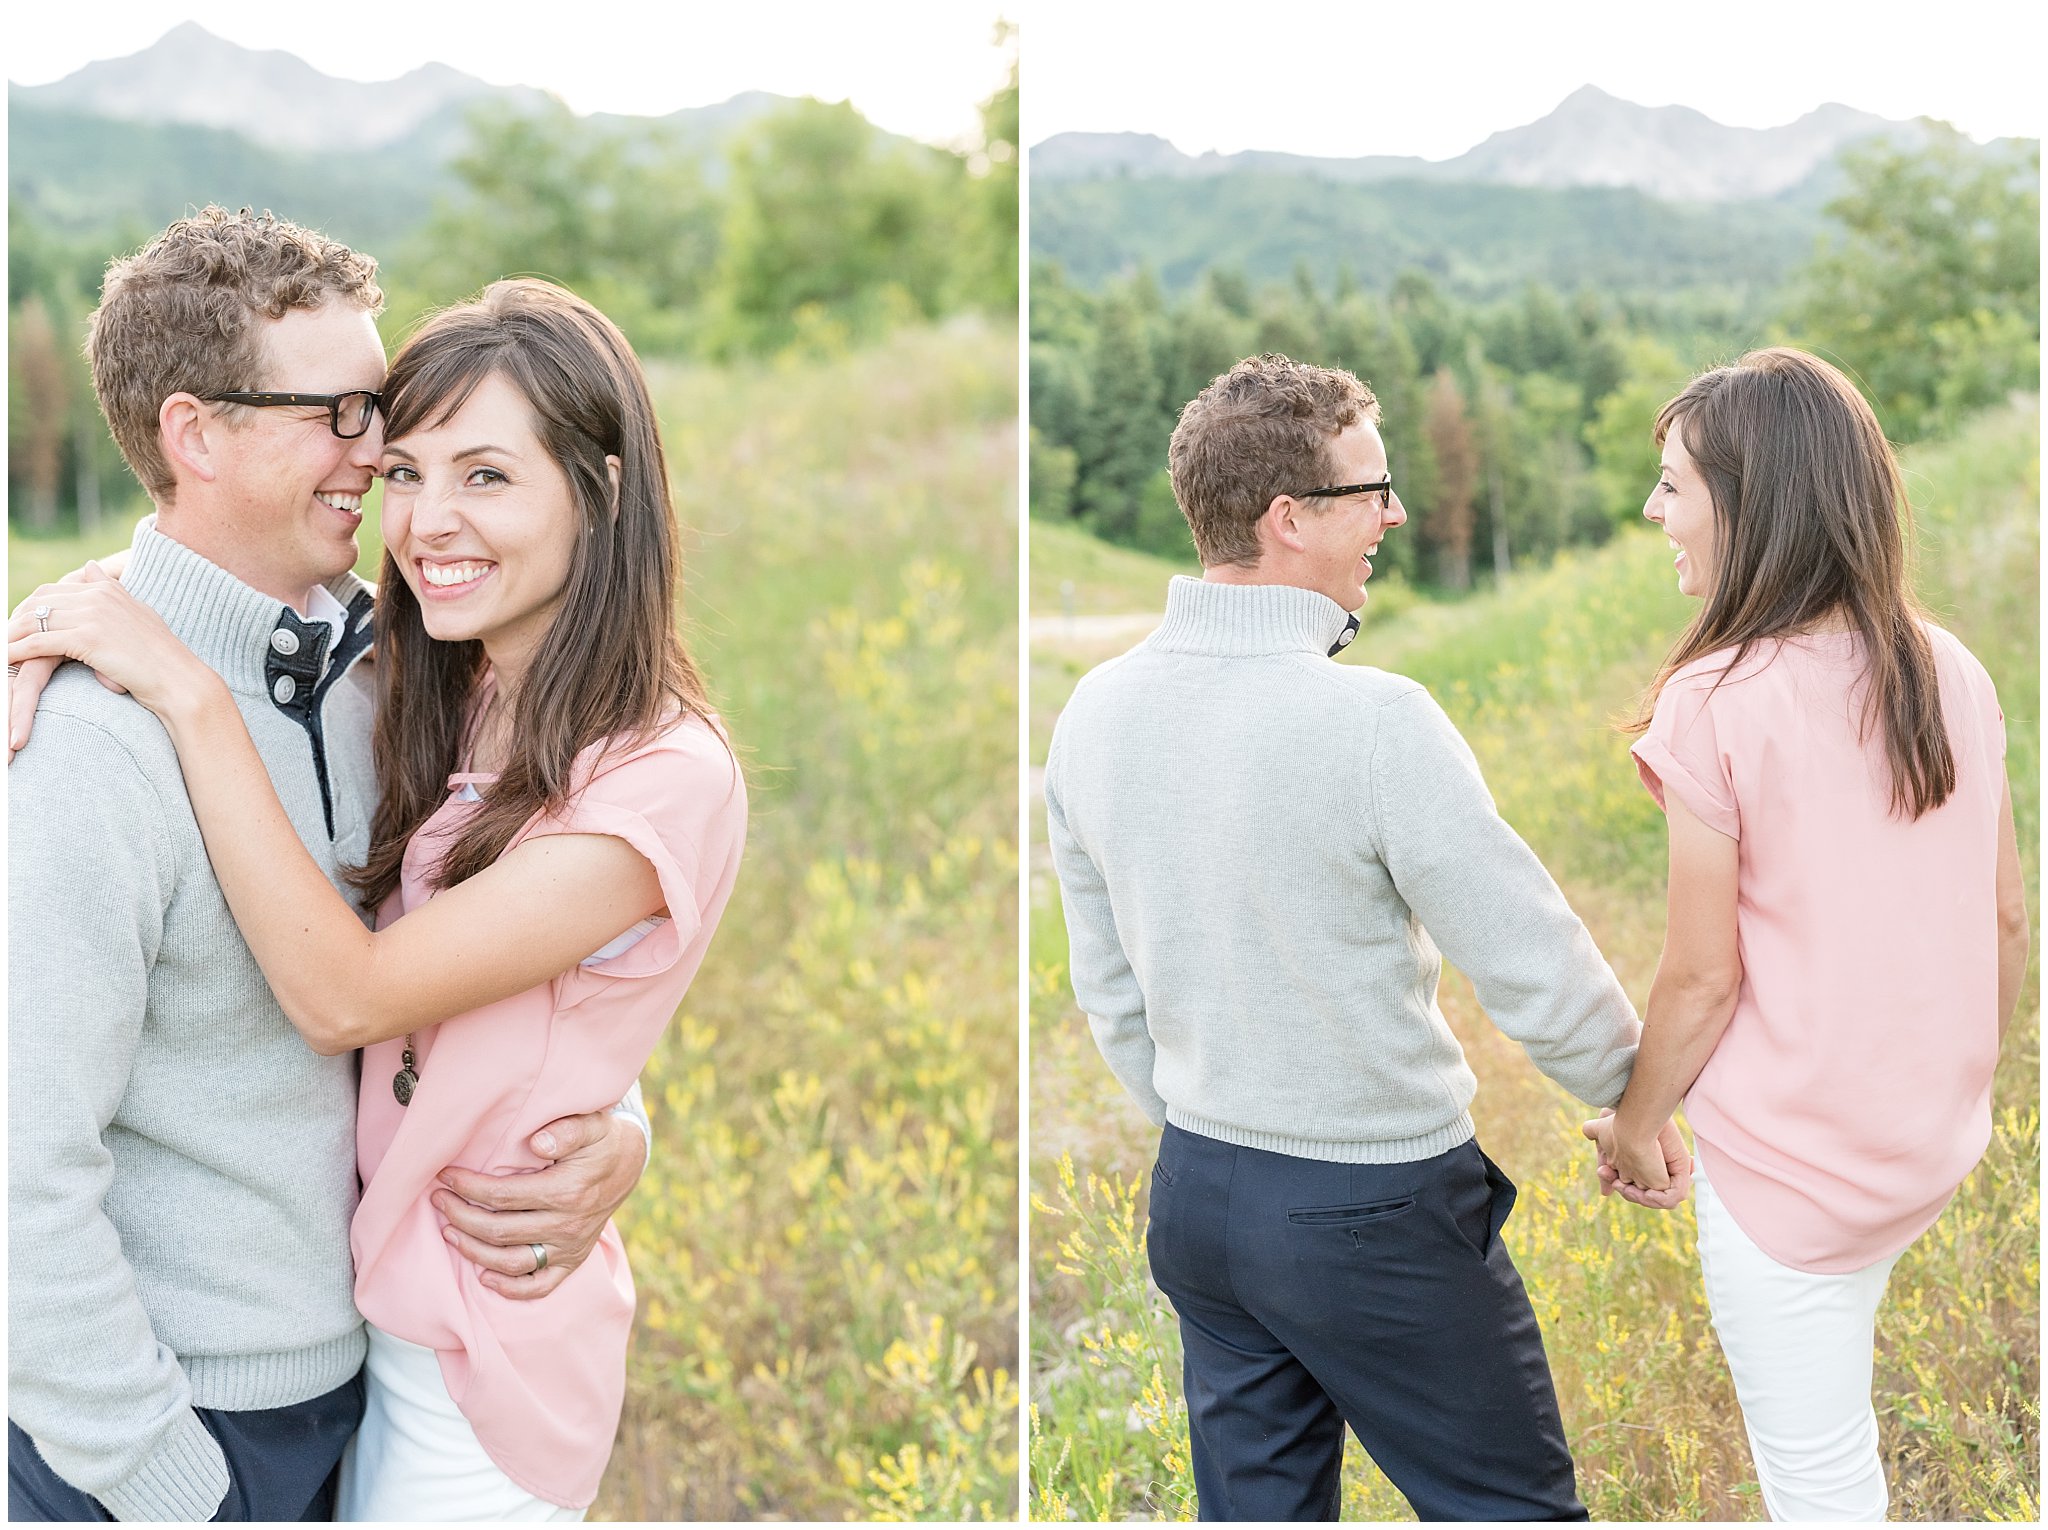 Joyful couple candid pictures walking and smiling with mountains behind them | Utah couples photography at Snowbasin